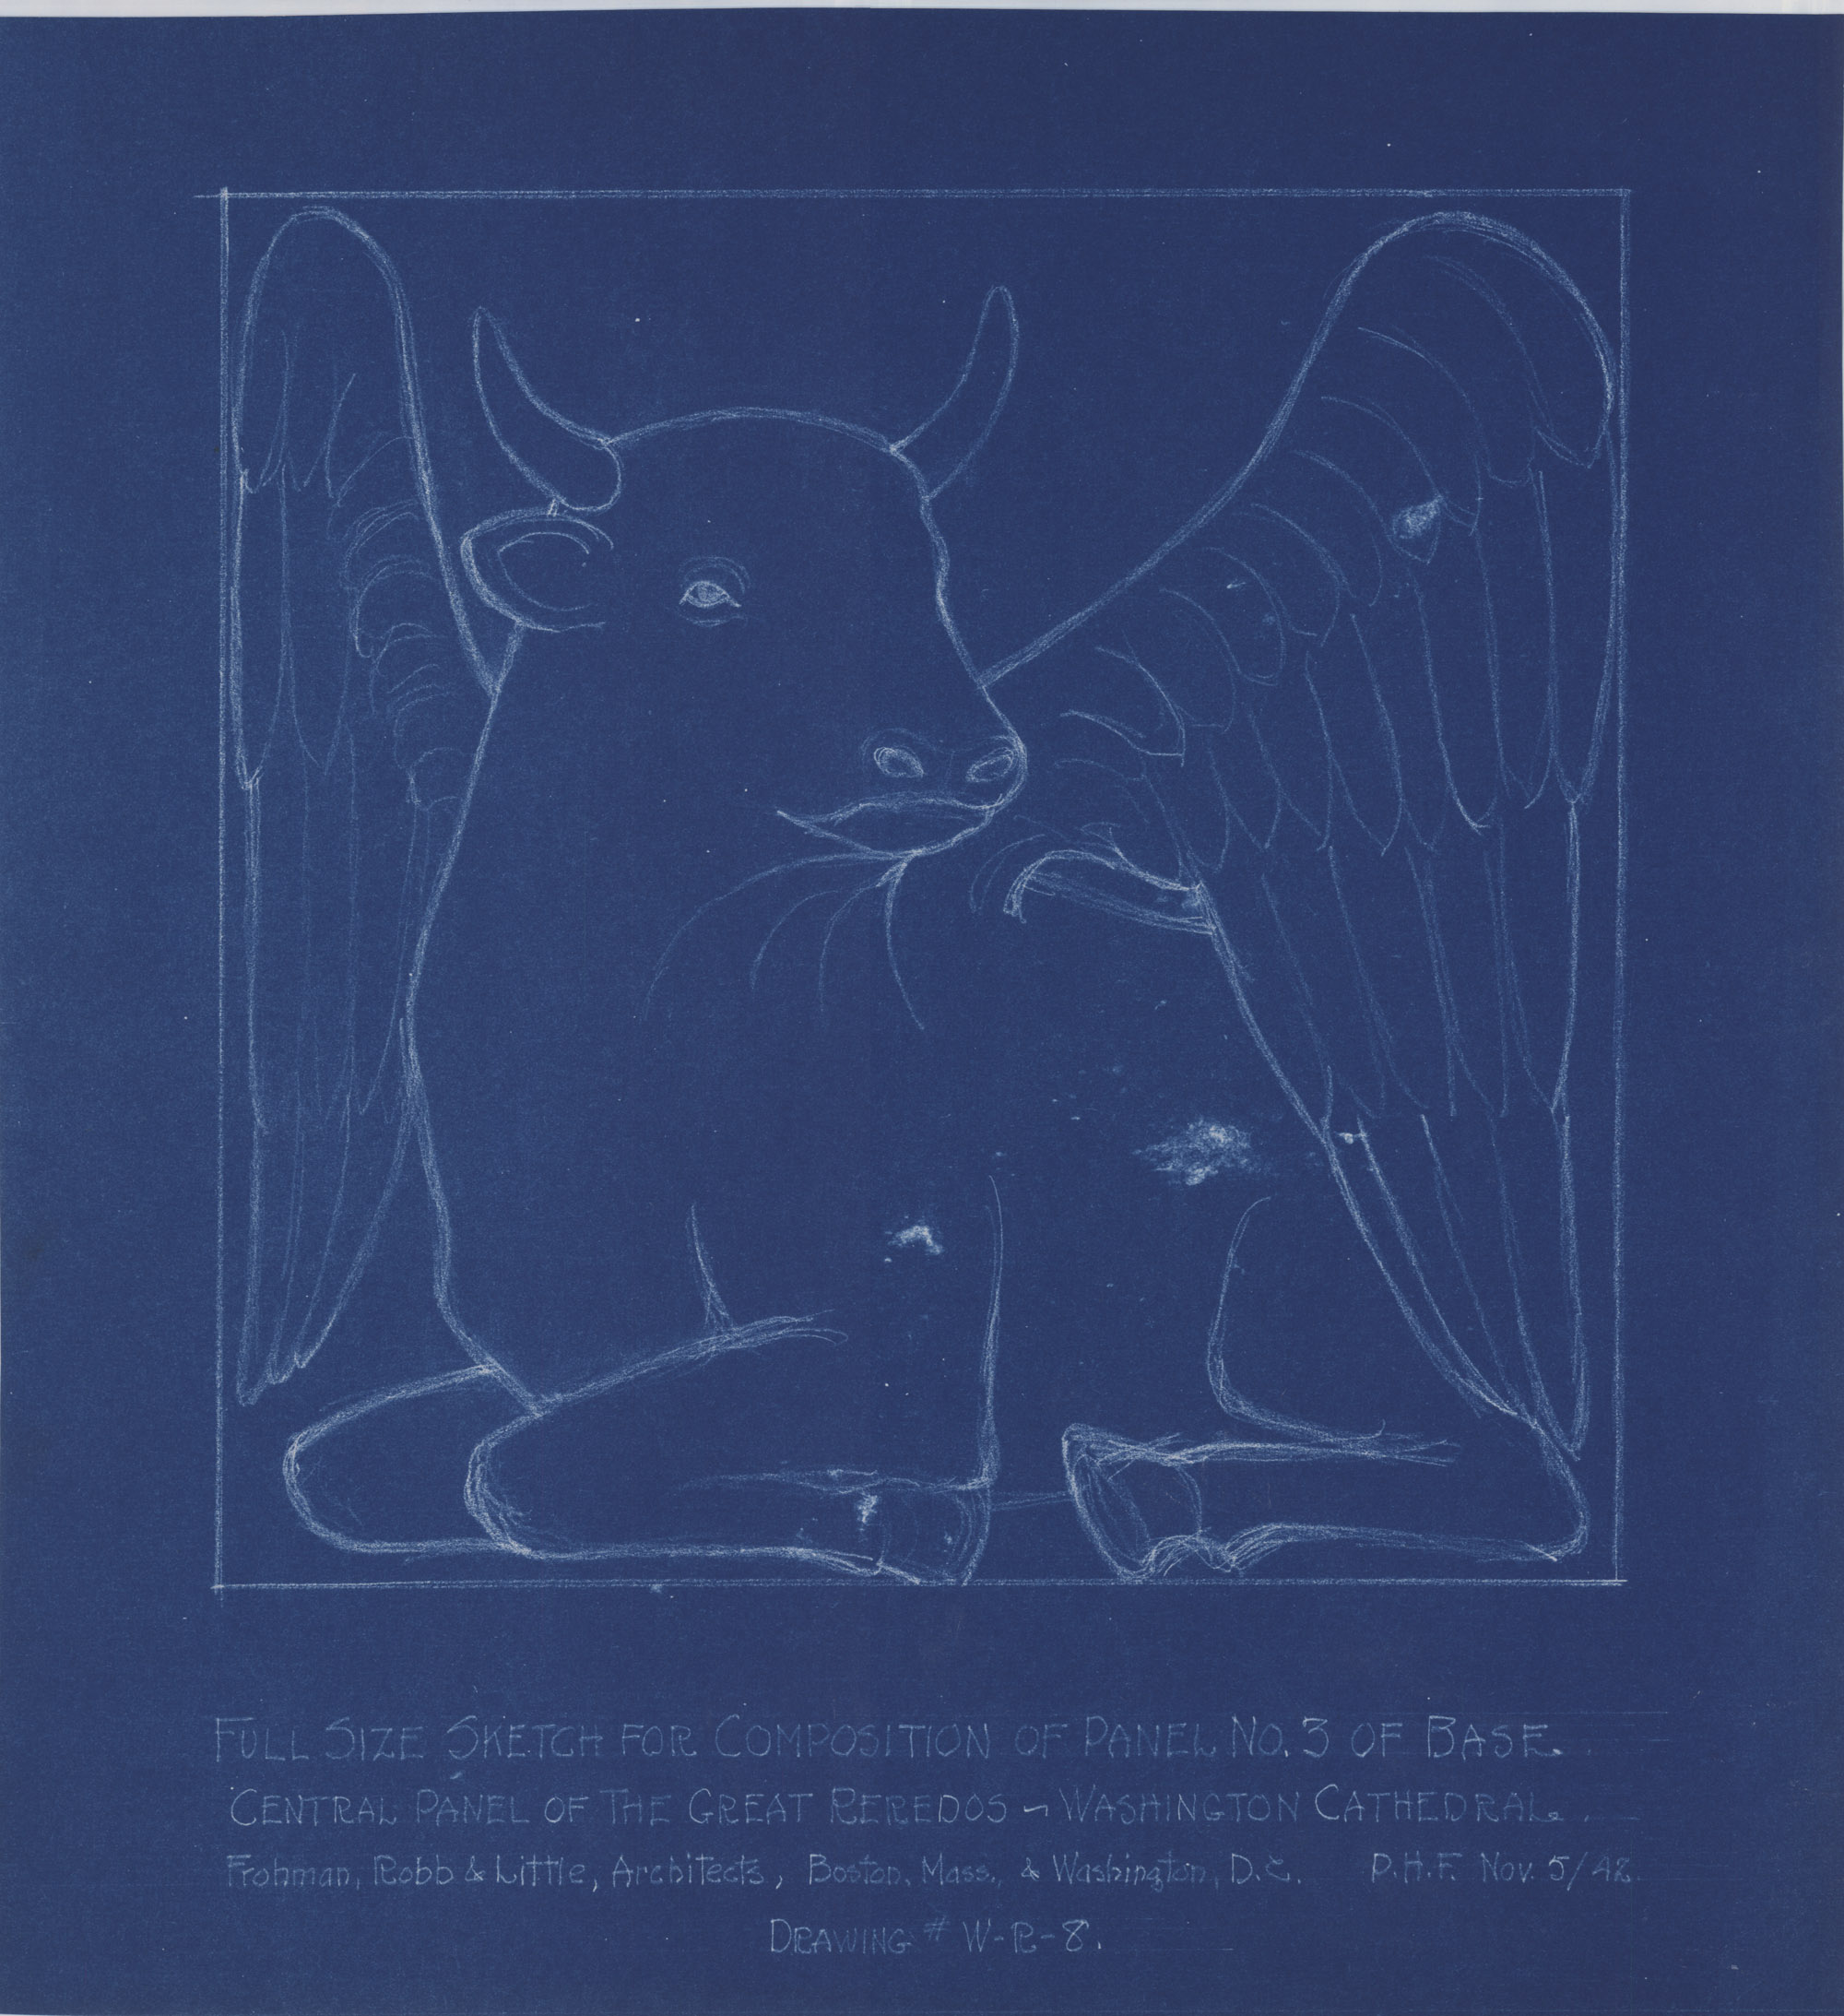 Blueprint sketch of winged bull, by Frohman, Robb & Little Architects. Courtesy Washington National Cathedral Construction Archives Collection.